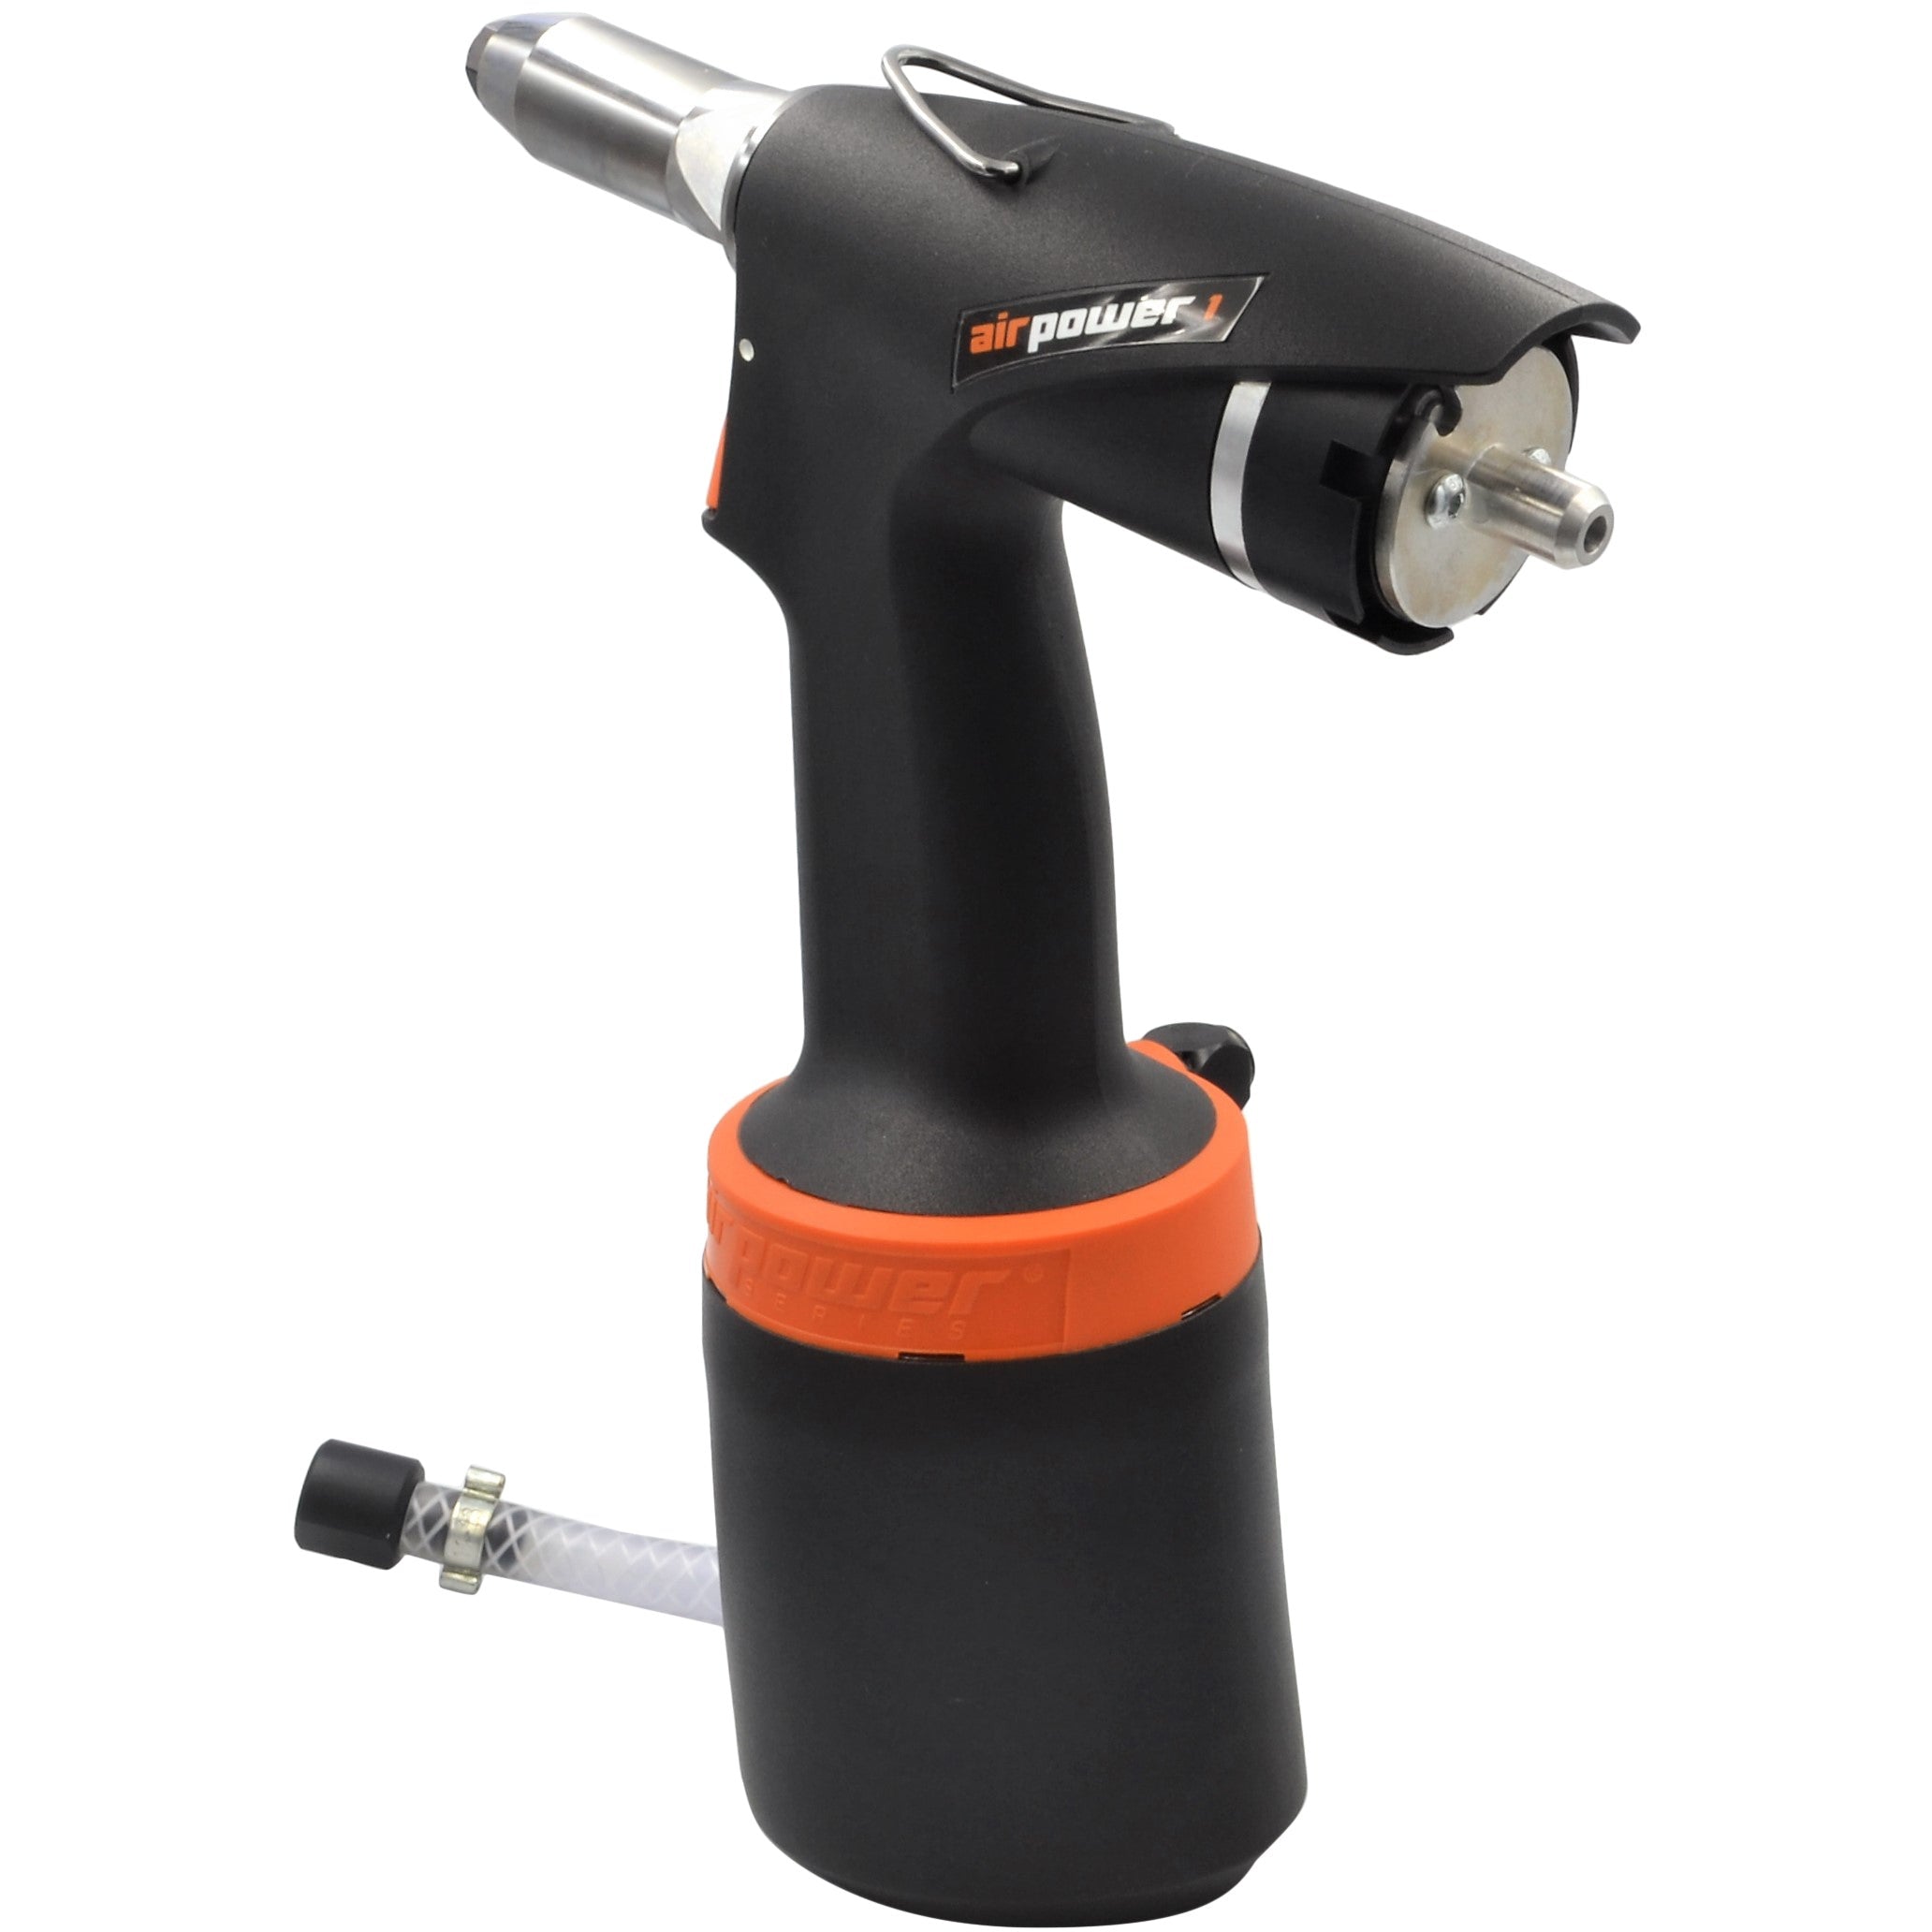 AP-1 Air Rivet Gun with Extraction and Multifunction Trigger setting